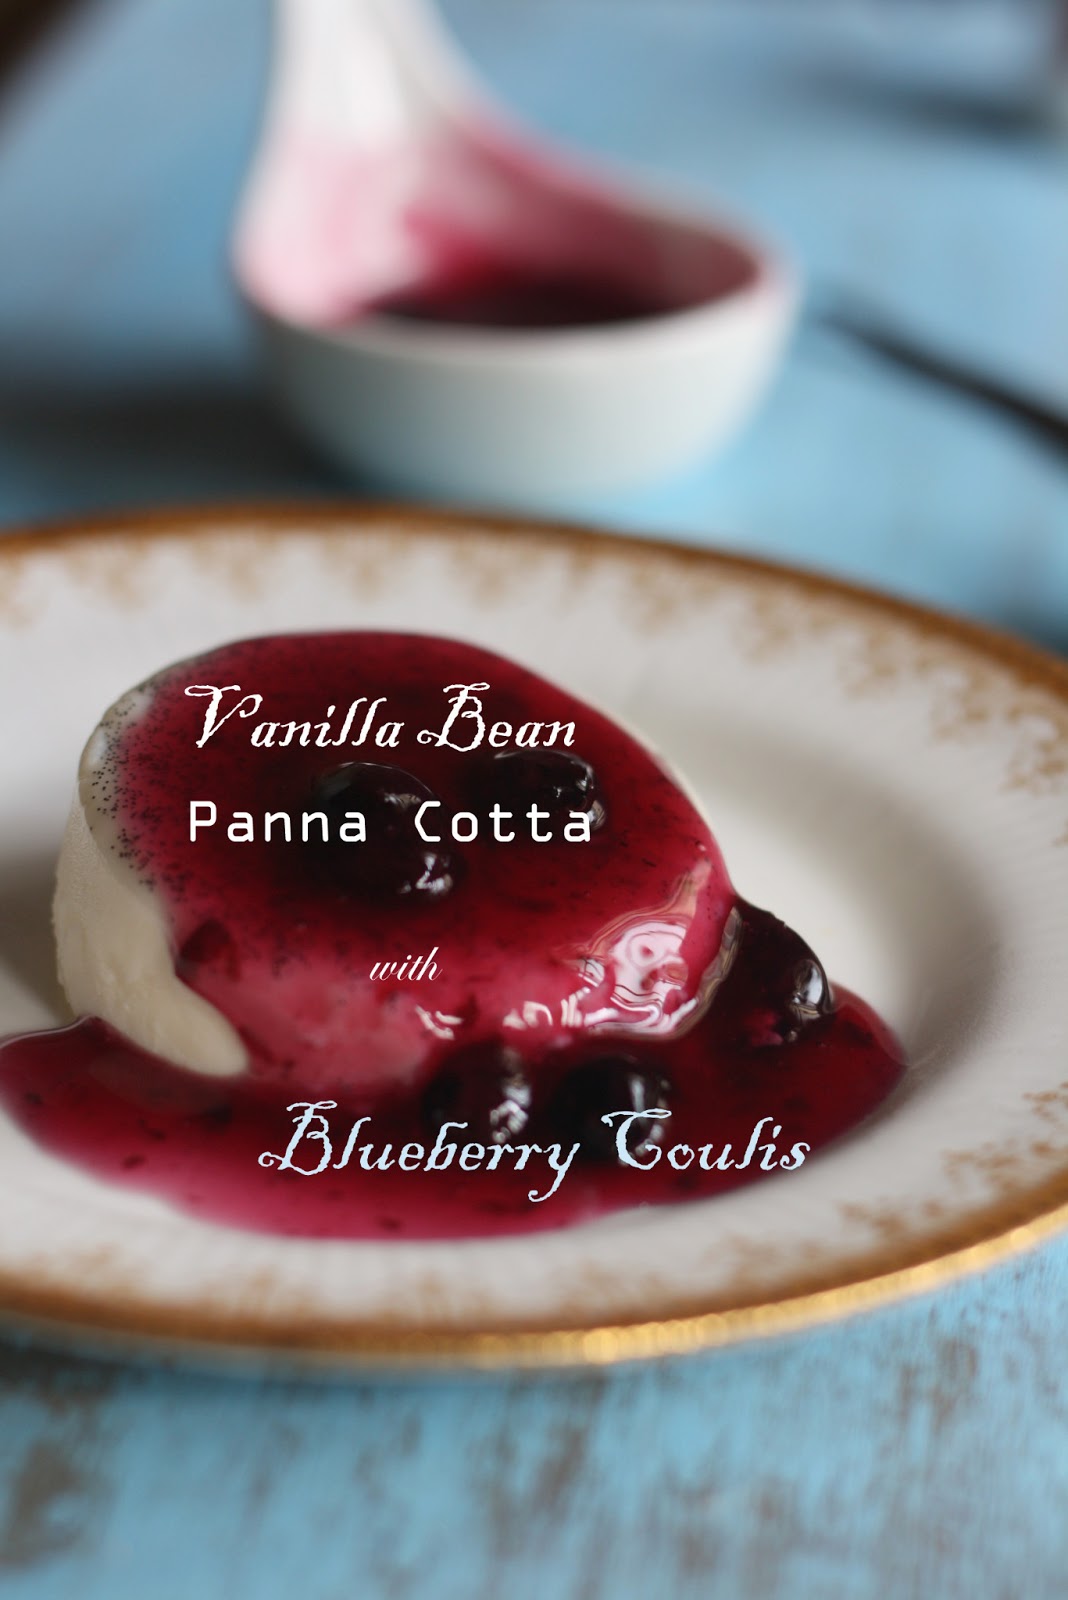 For the love of food!: Vanilla bean Panna Cotta with Blueberry Coulis